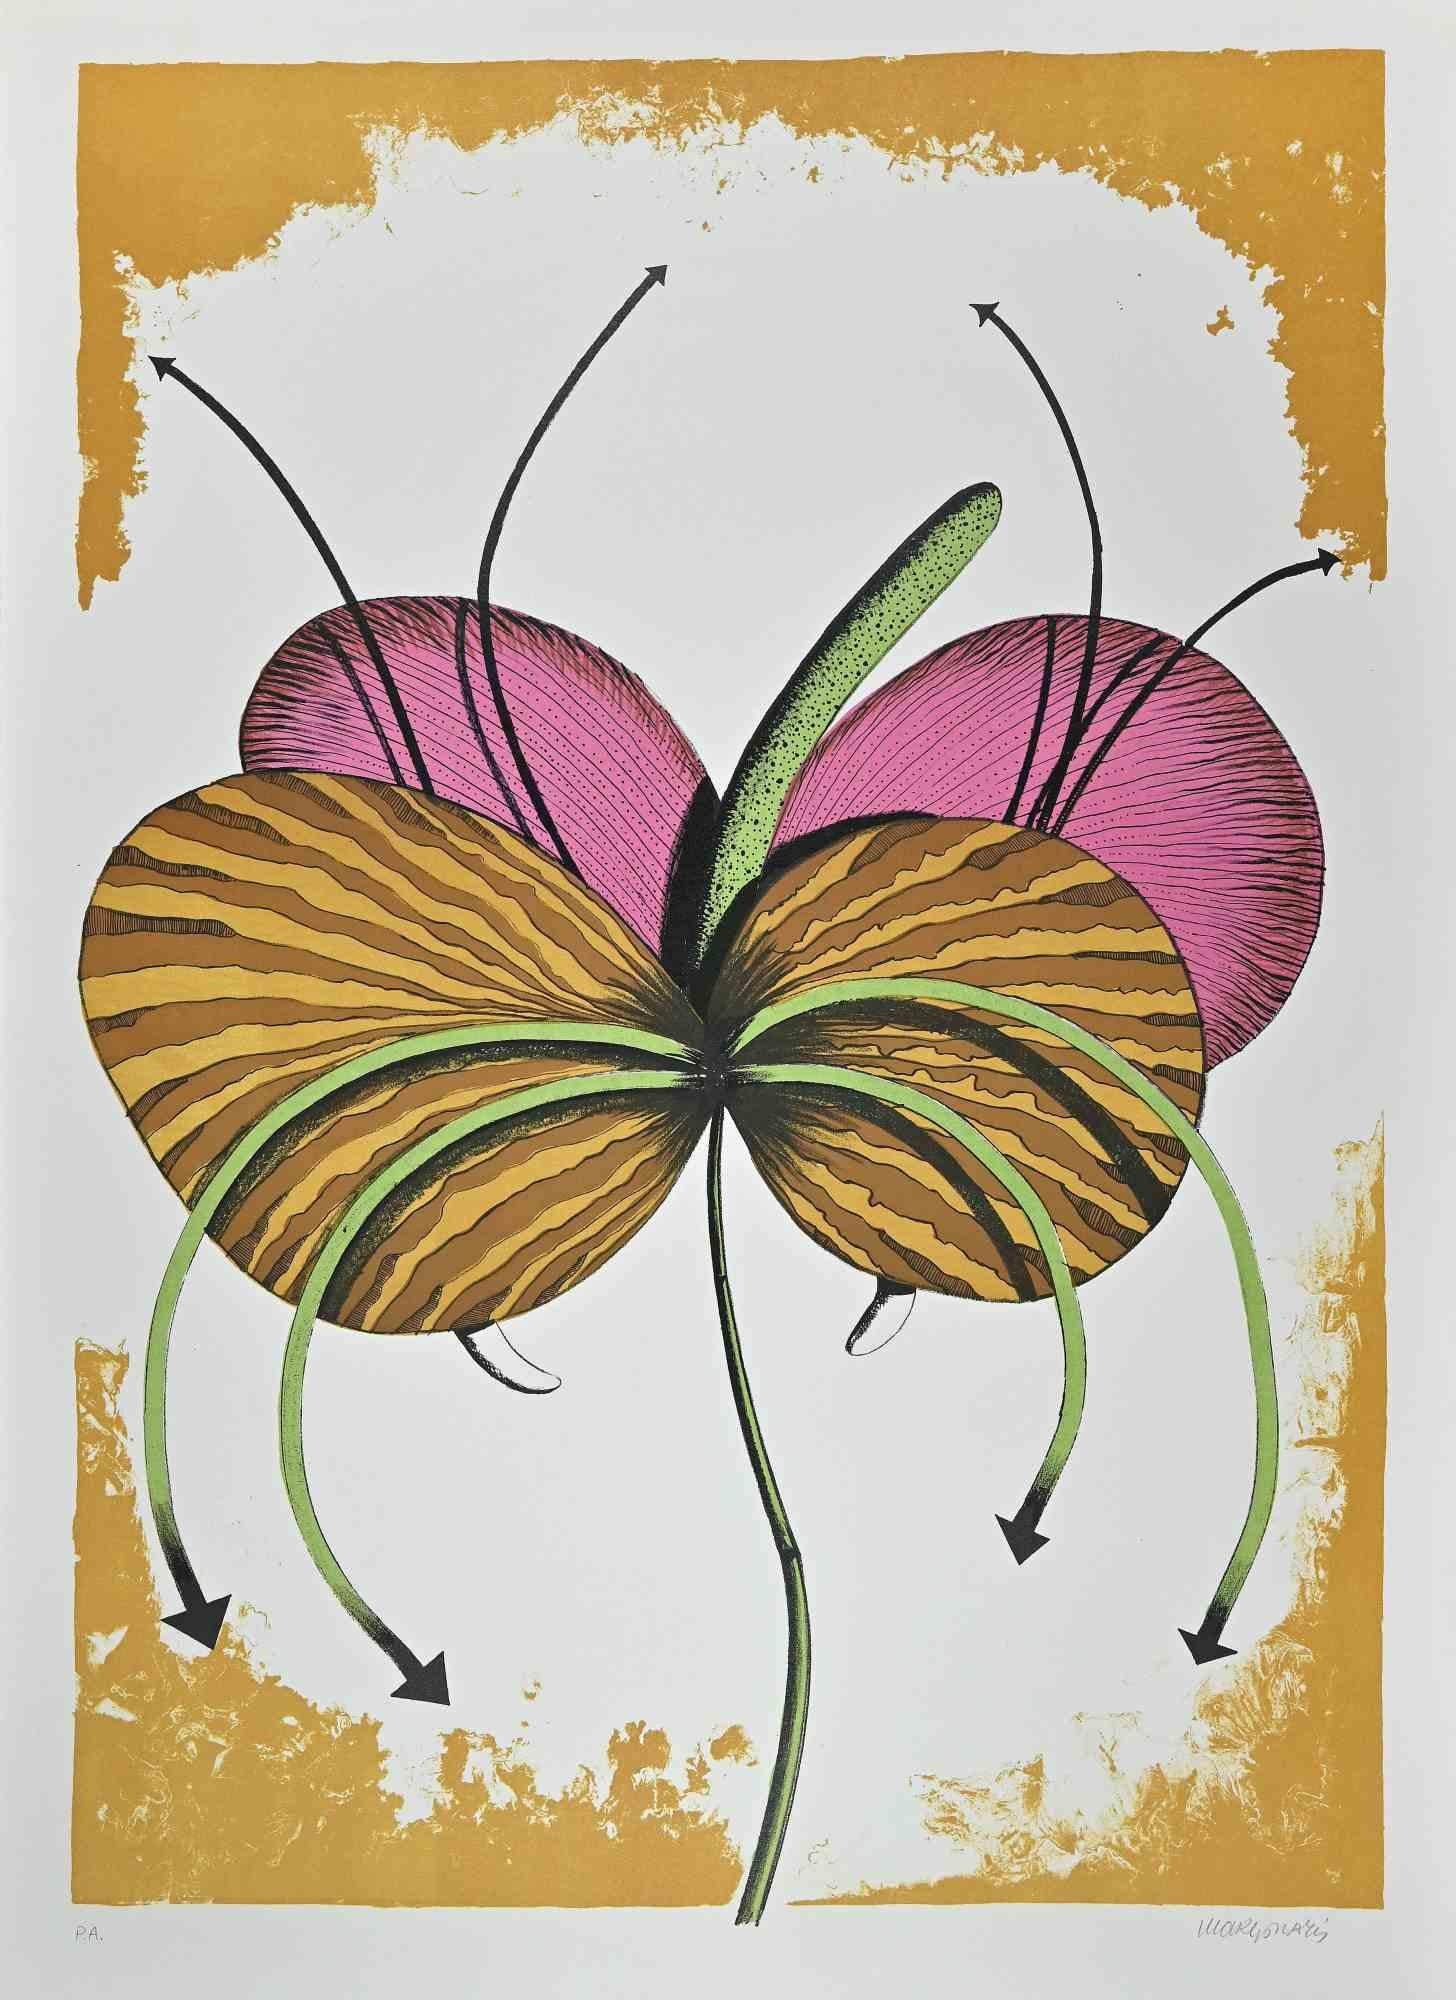 Fiore disponibile is an original lithograph realized by Renzo Margonari in 1976.

Hand-signed.

Artist's Proof.